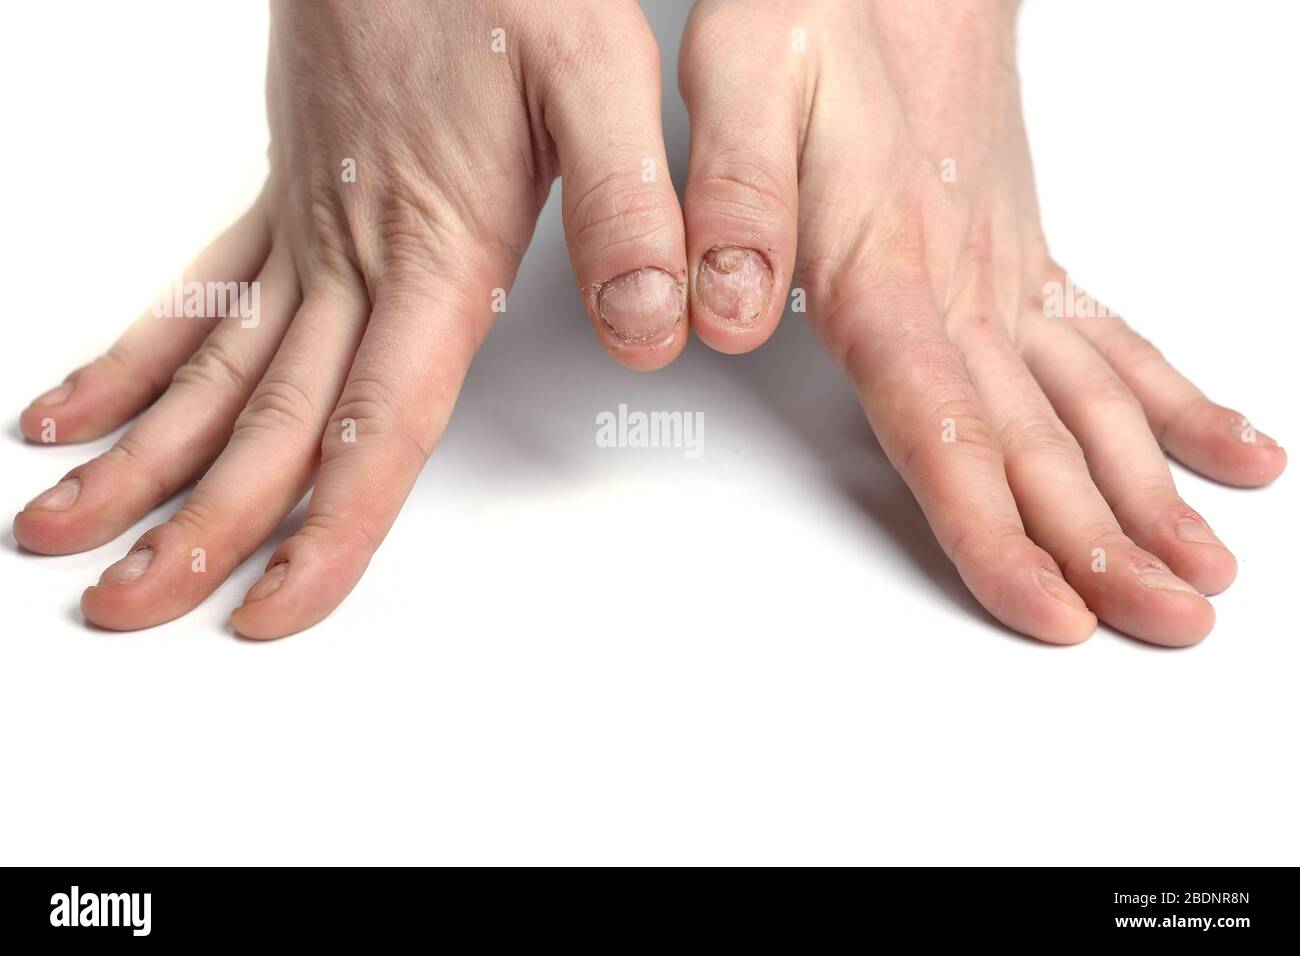 How to treat a fungal nail infection | Health | The Guardian